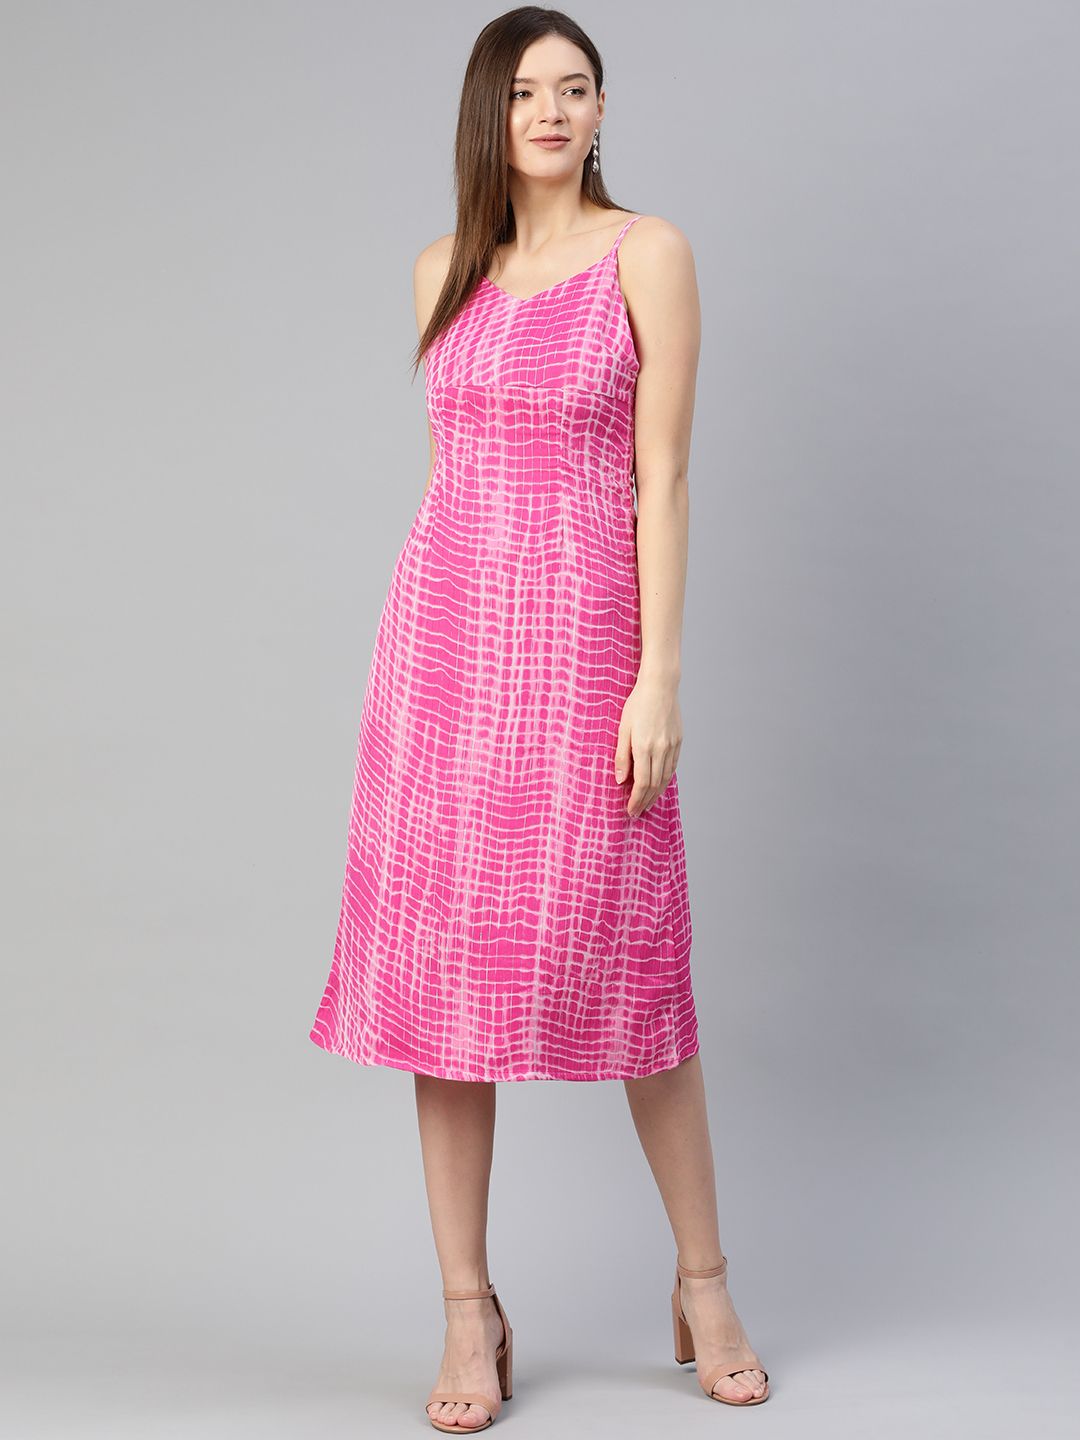 Pluss Charming Pink and White Dyed Ruched Dress Price in India